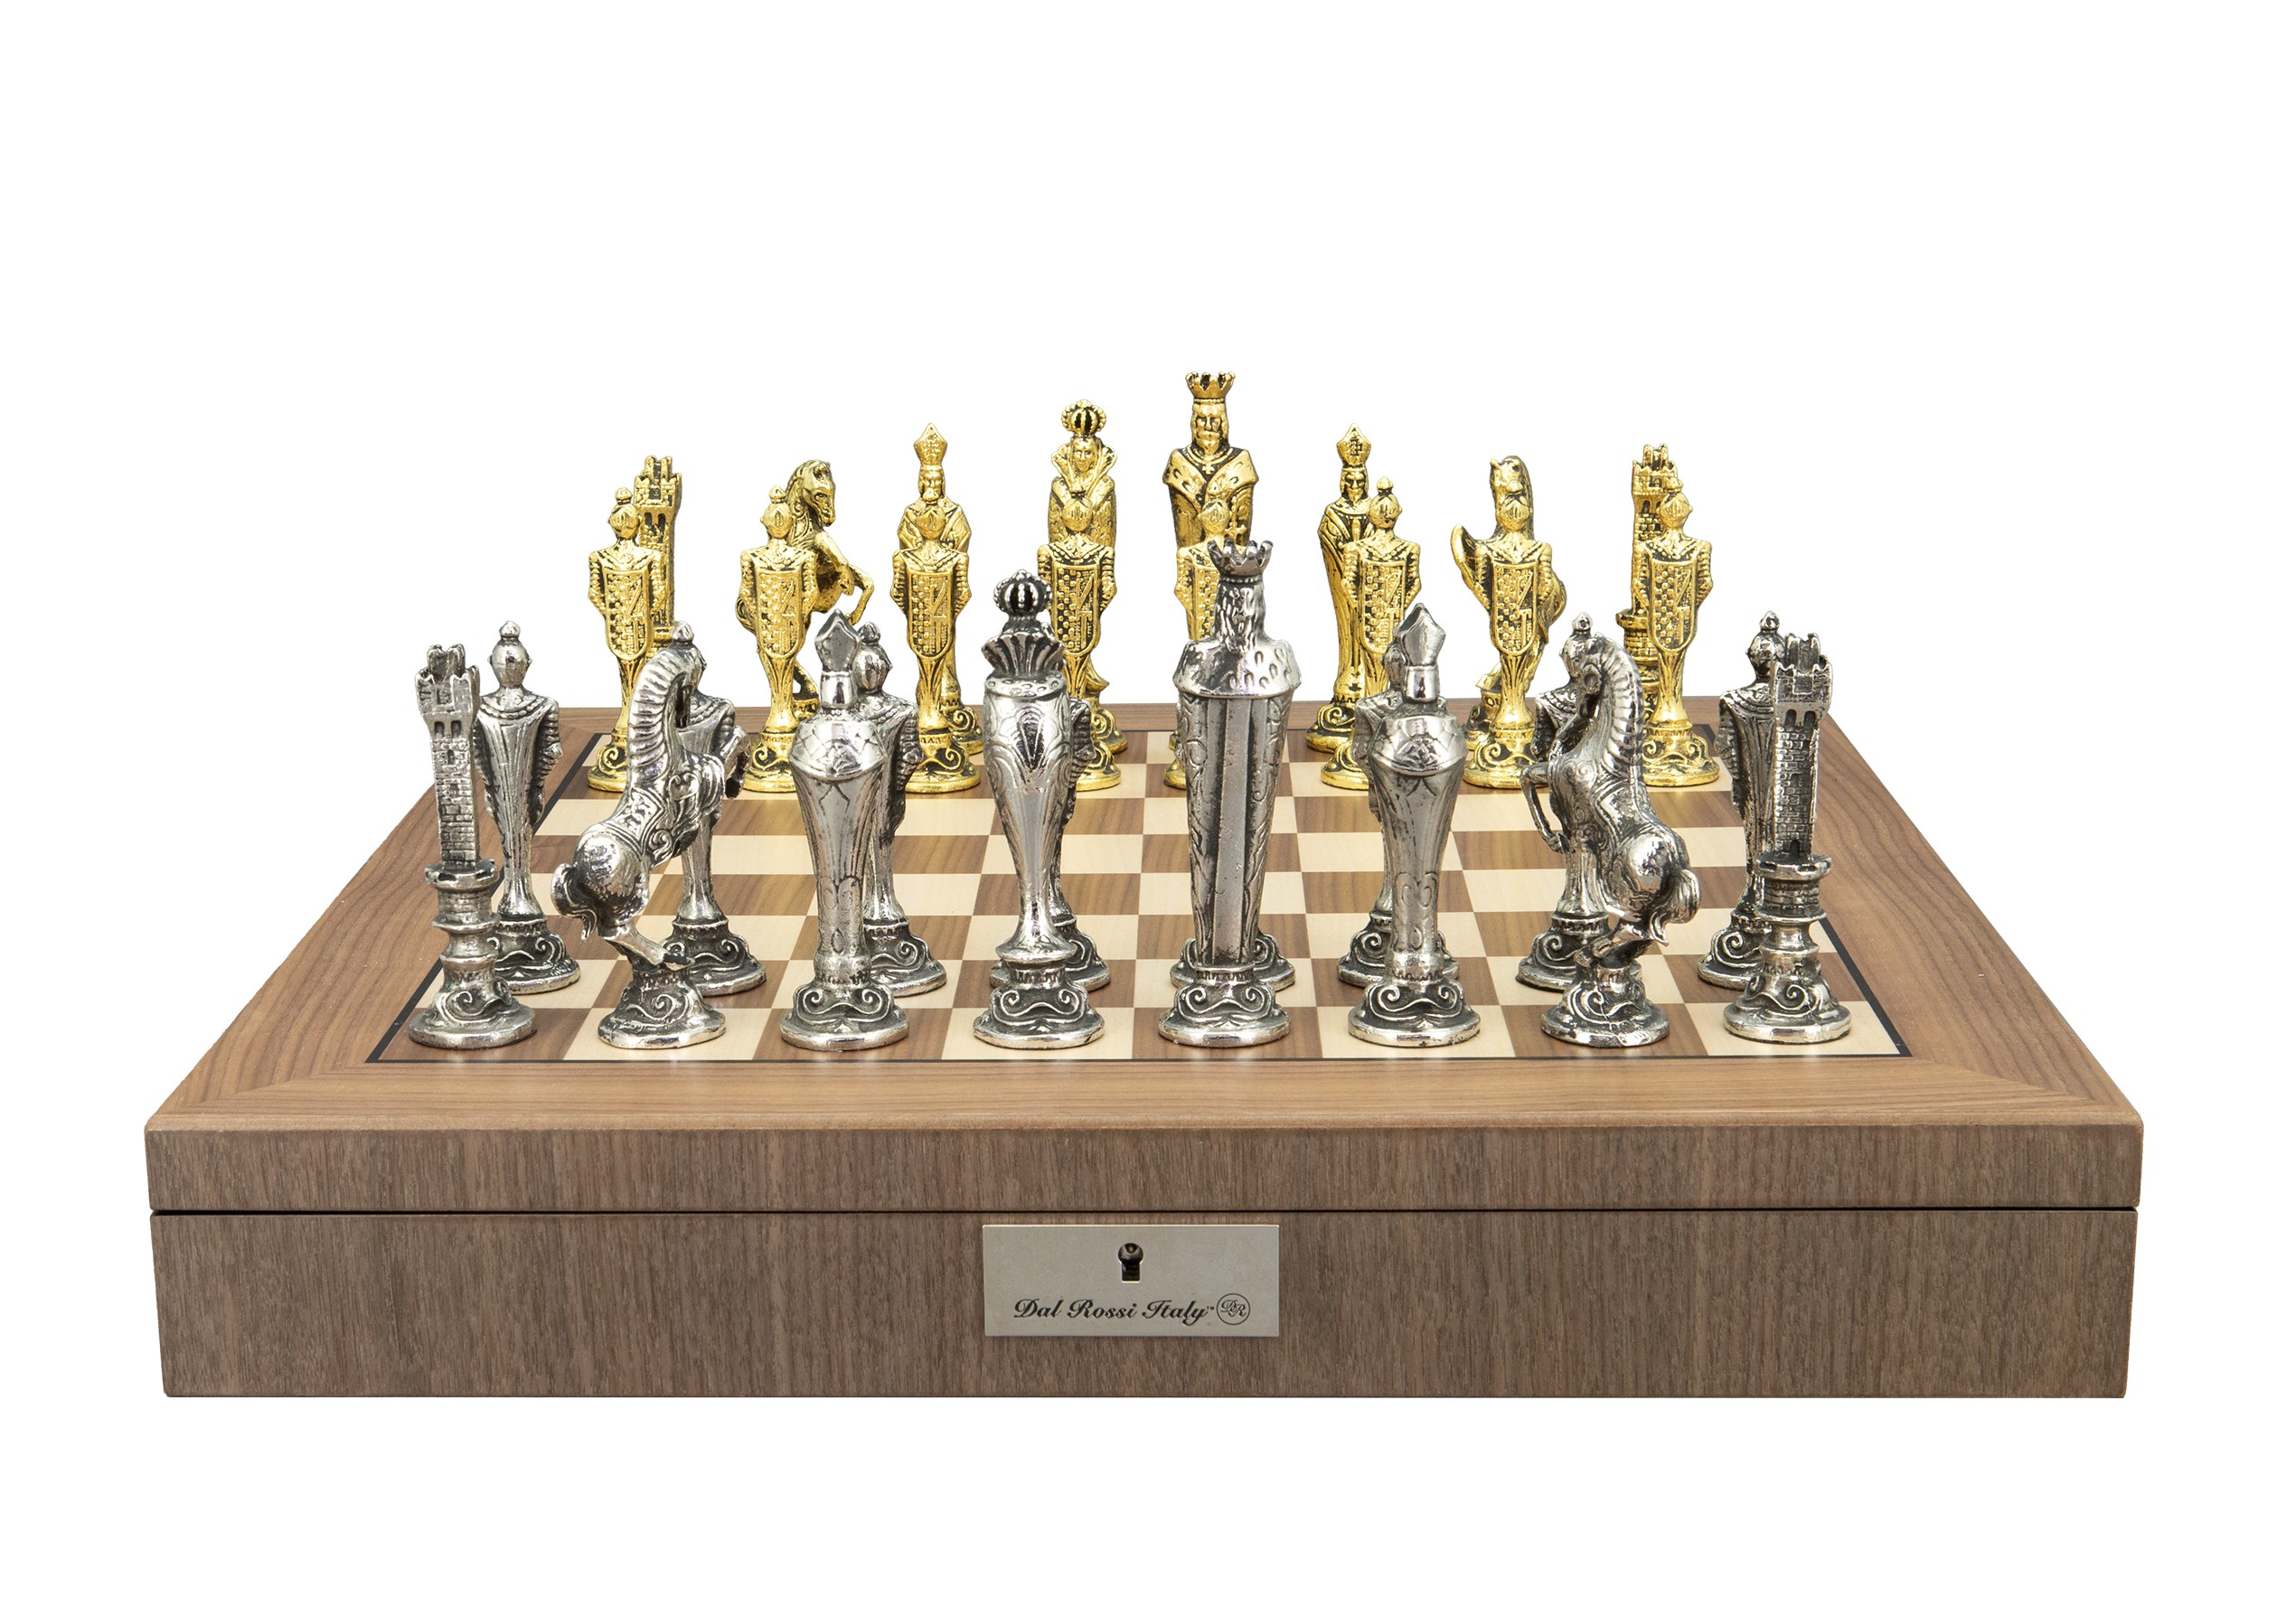 Dal Rossi Italy, “Renaissance” Chessmen on a Walnut Inlaid Chess Box with Compartments 20"